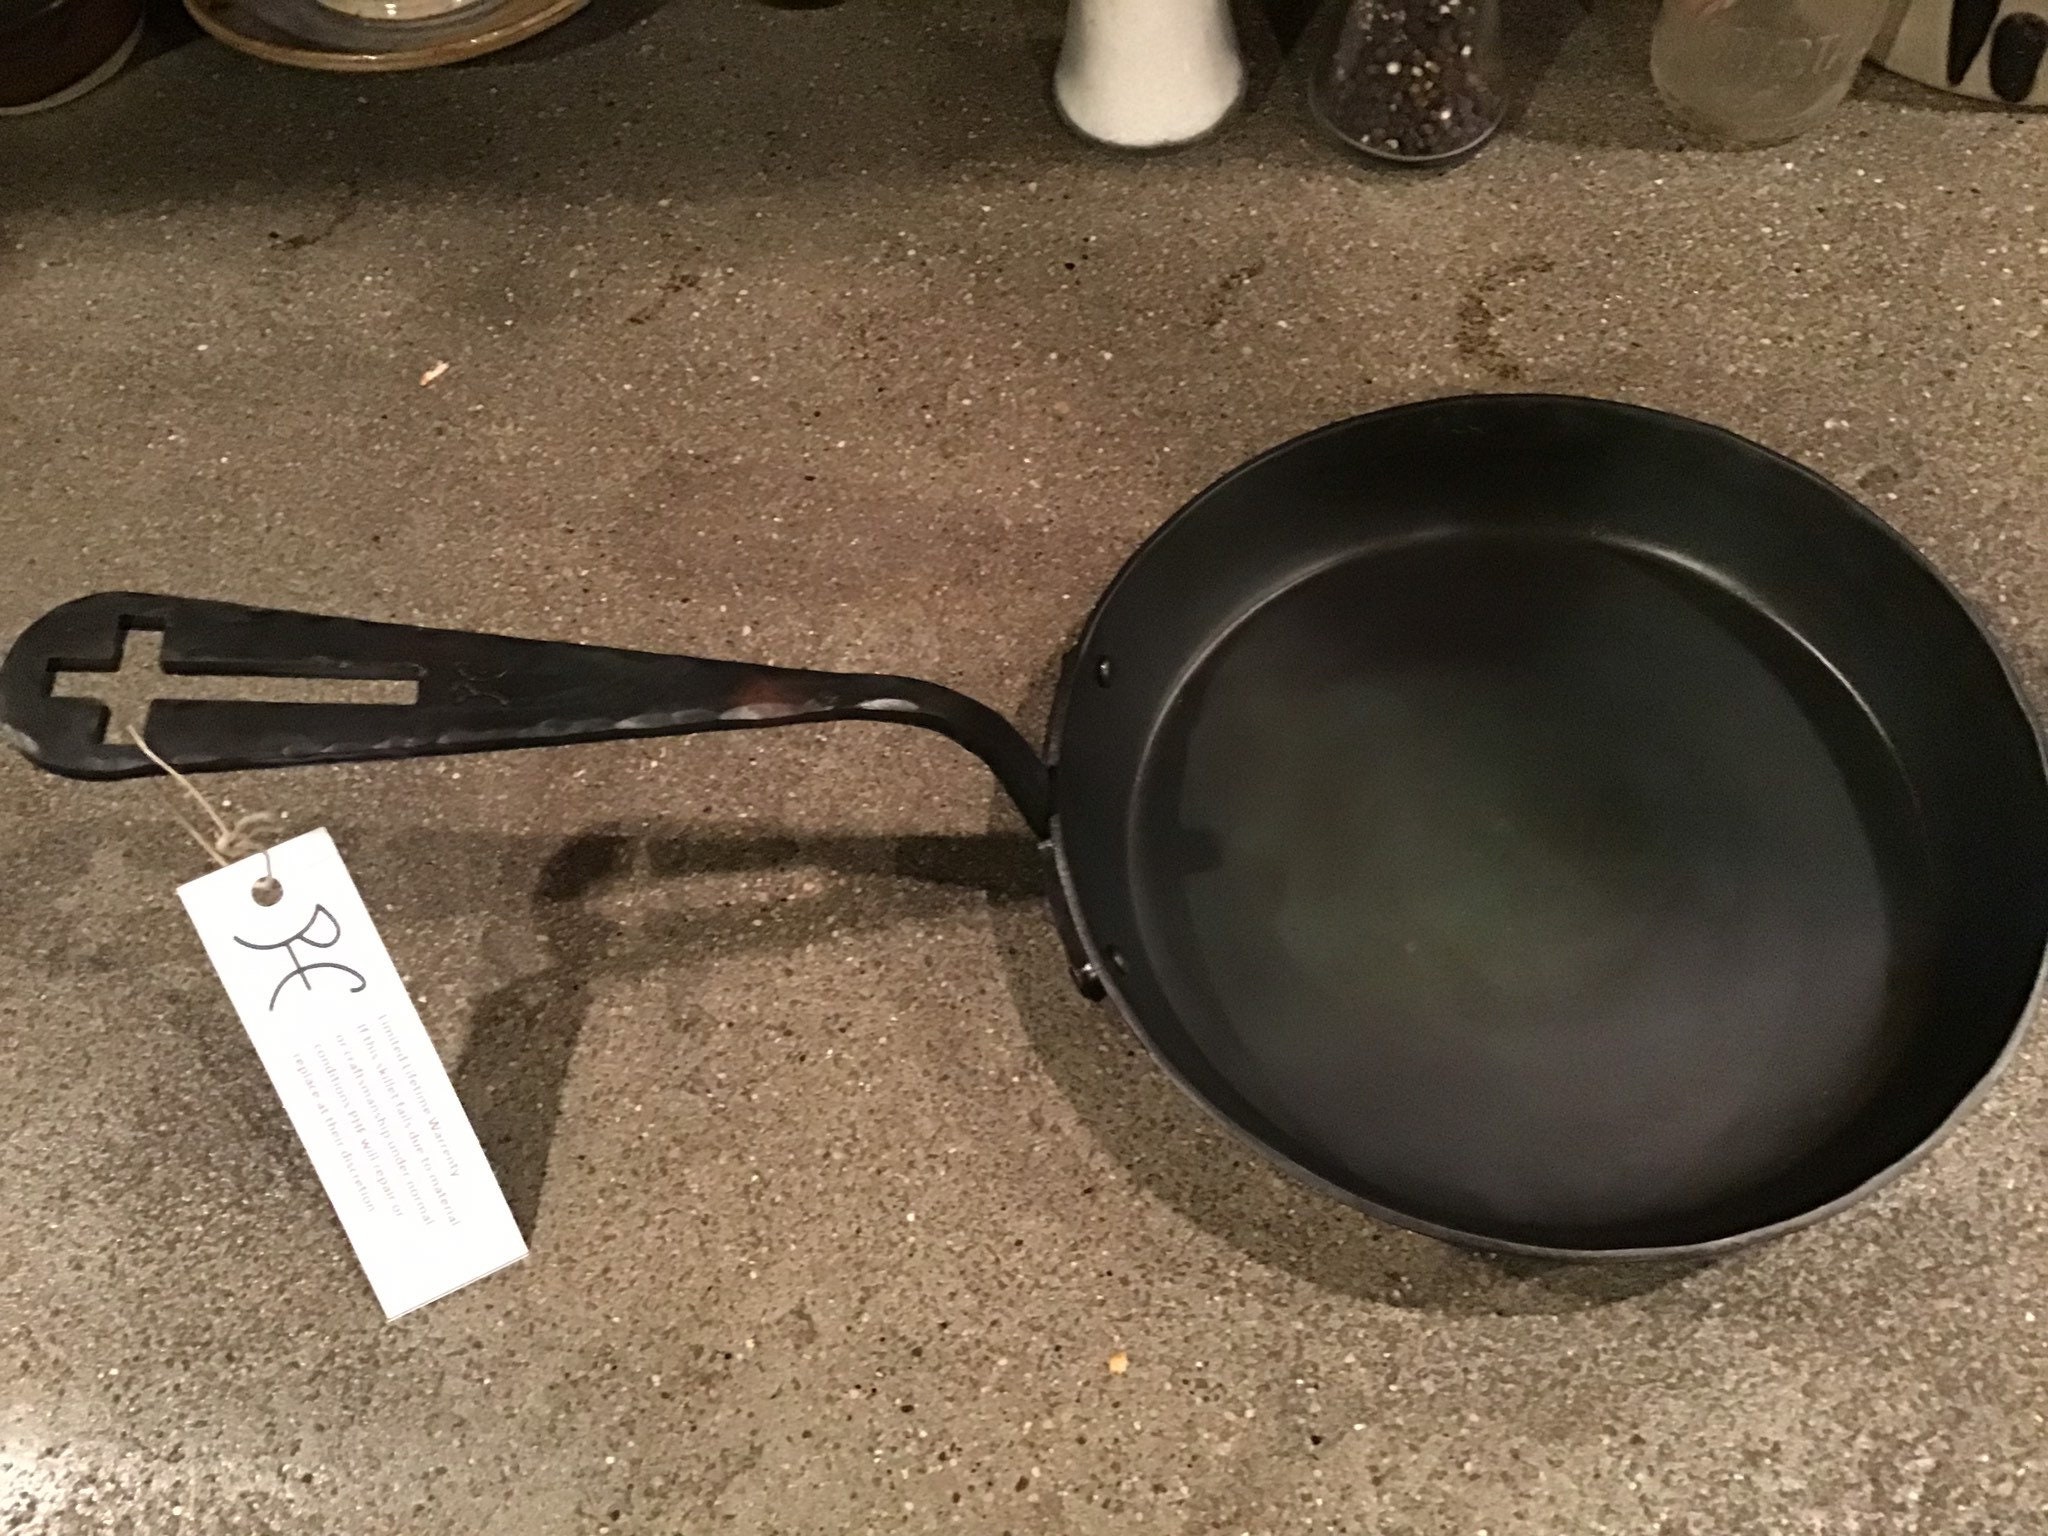 Hand Forged Carbon Steel Paella and Frying Pans - Willow Creek Forge